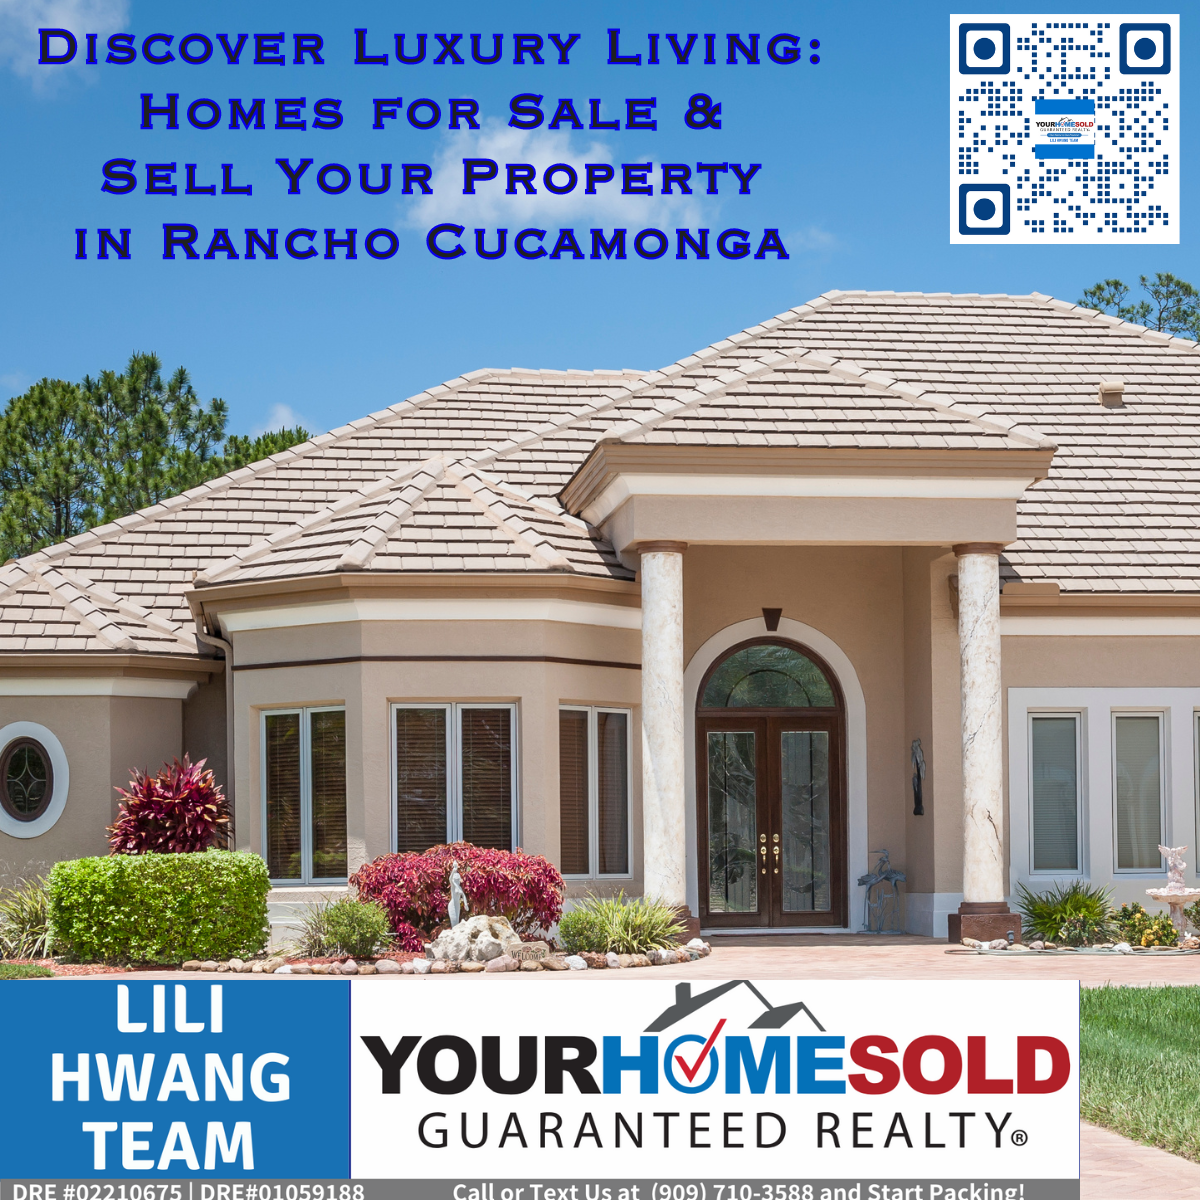 Discover Luxury Living: Homes for Sale & Sell Your Property in Rancho Cucamonga. effectively communicates the opportunity for buyers to discover luxury living through homes for sale while also inviting sellers to consider listing their properties in Rancho Cucamonga. LiLi Hwang Team of Your Home Sold Guaranteed Realty in Rancho Cucamonga can Empowering buyers, and sellers to elevate their lifestyles through proven results!